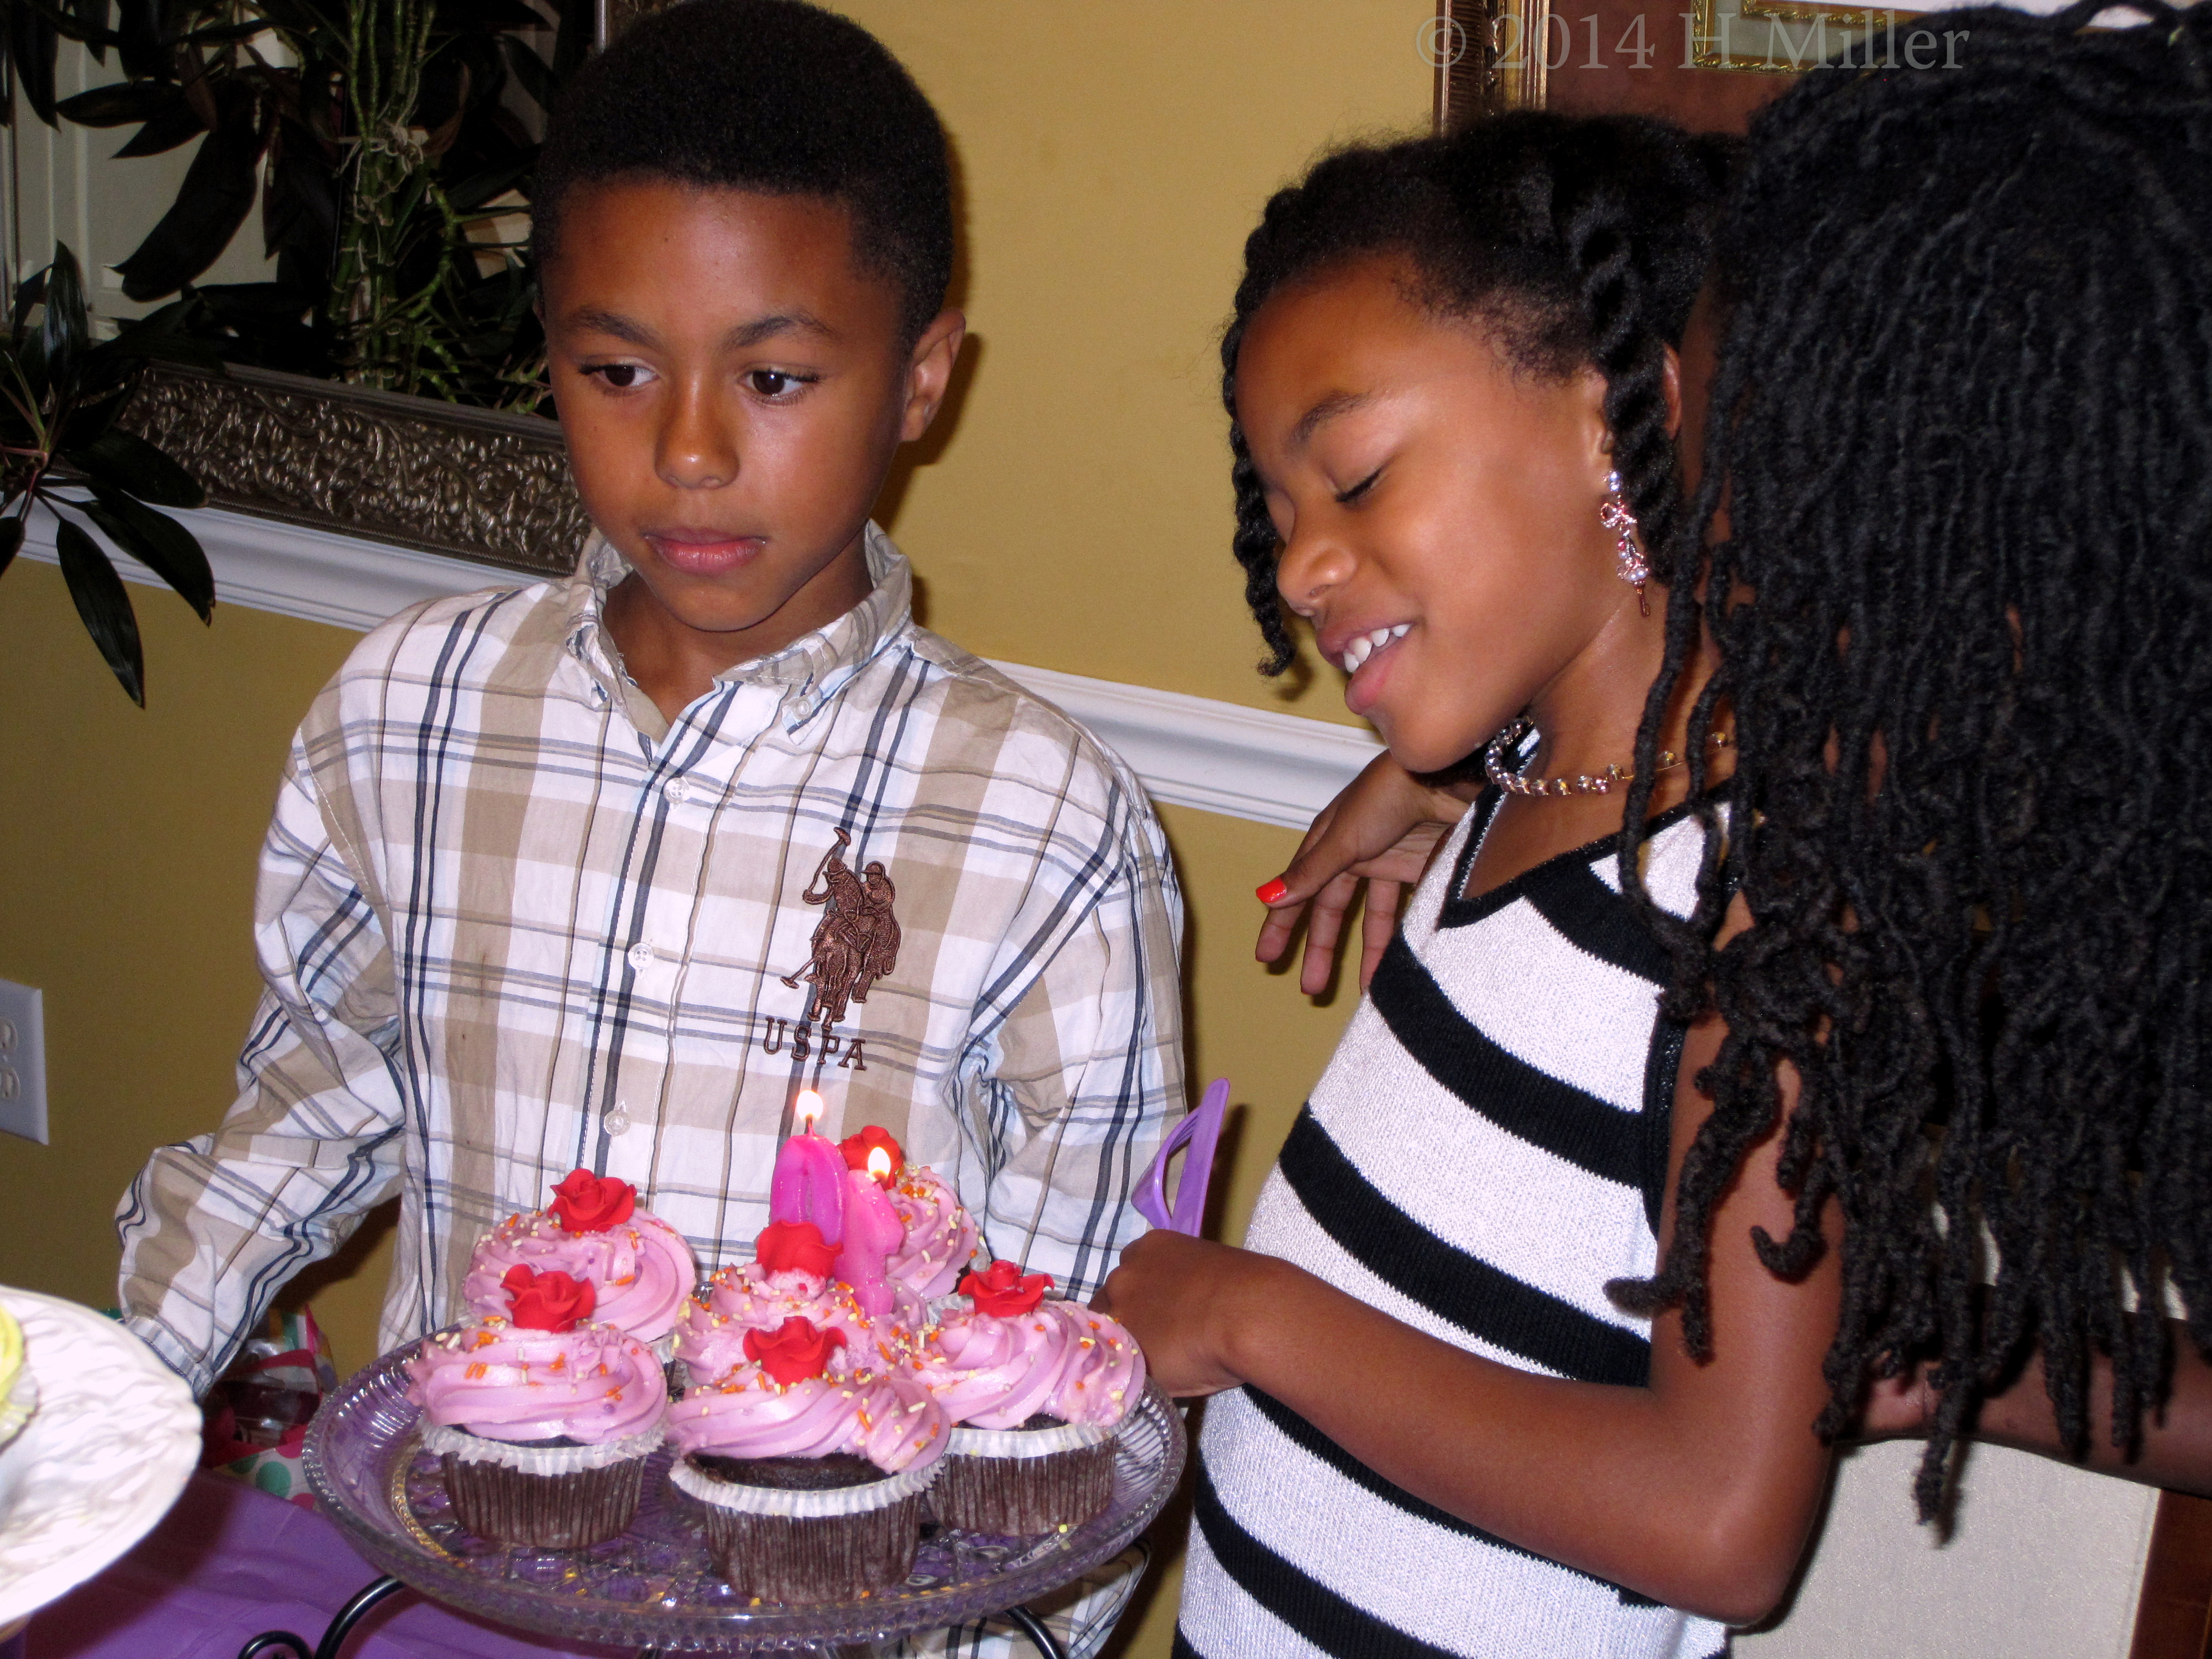 The Twins Blowing Out The Candles Together. 